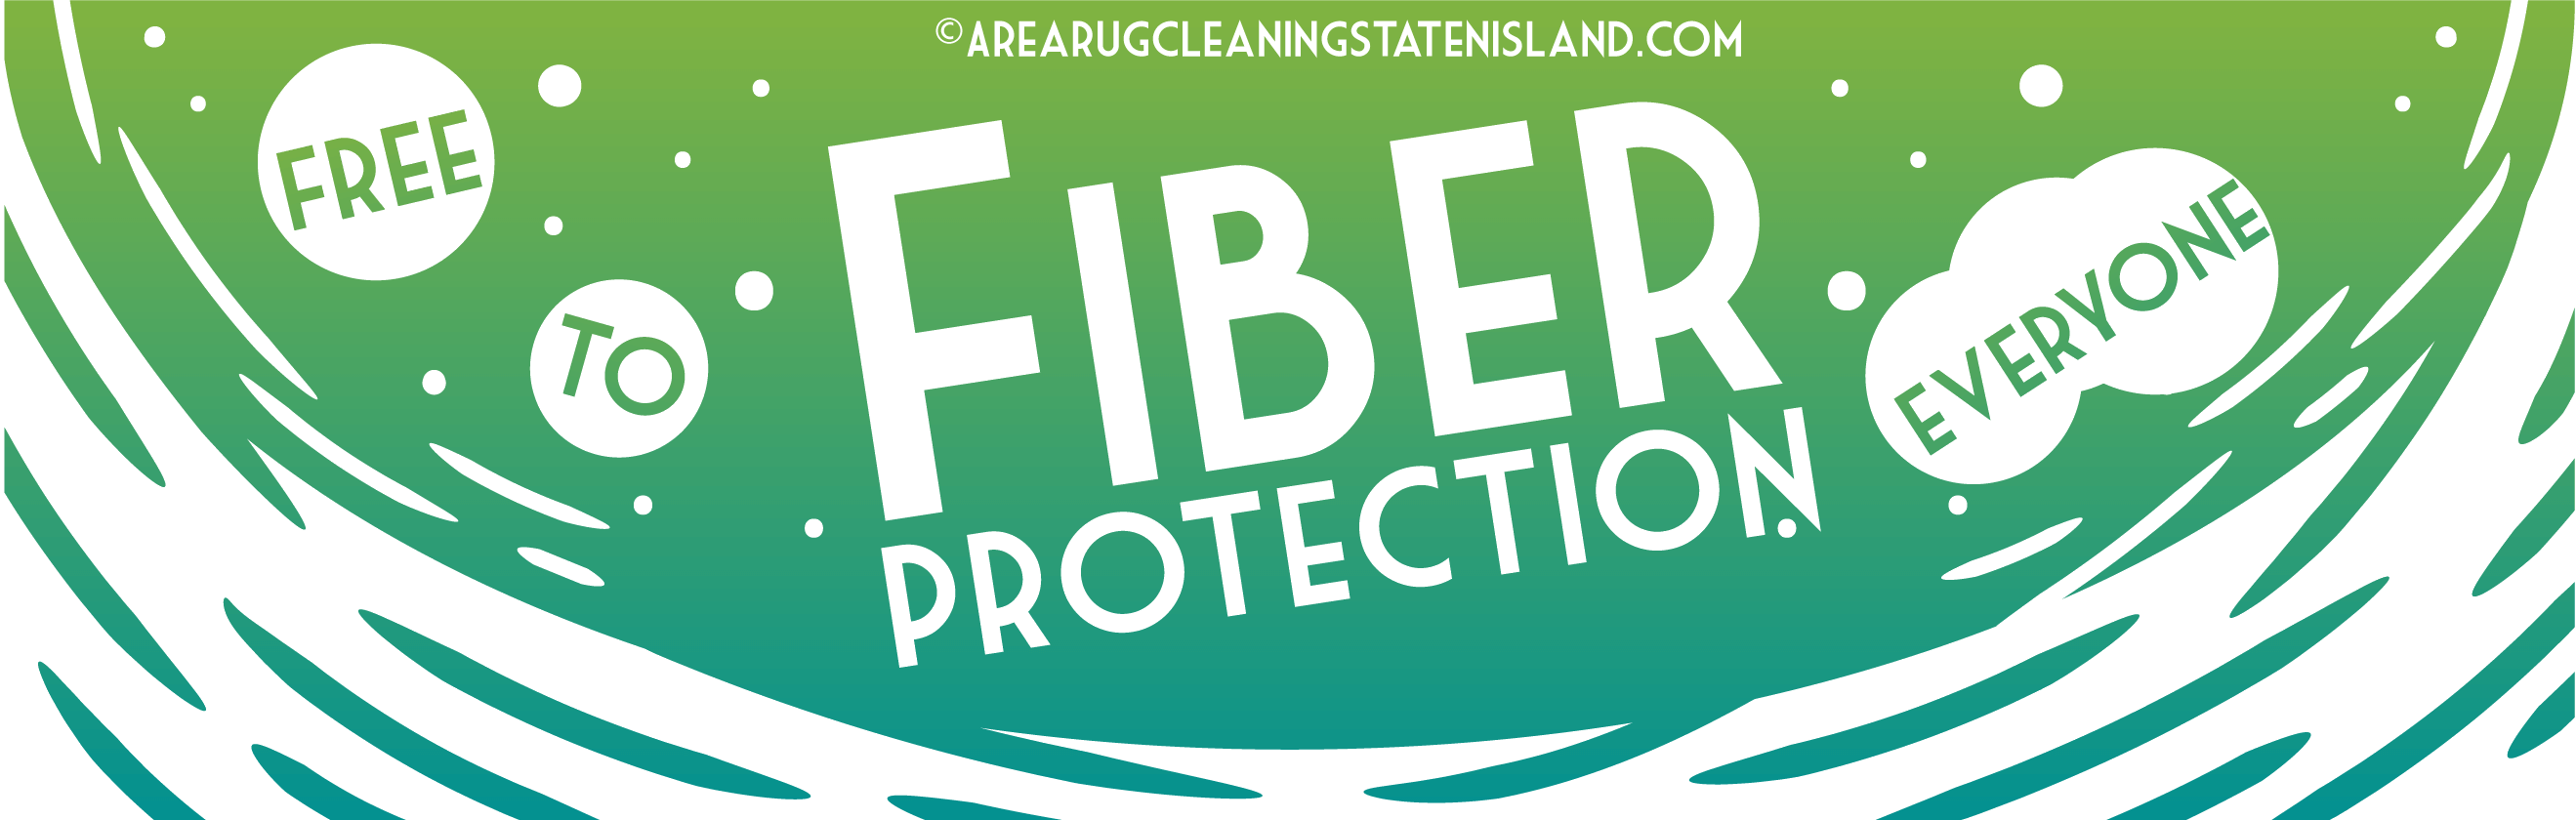 Free Fiber Protection for All Cleaning - Bulls-head-10314